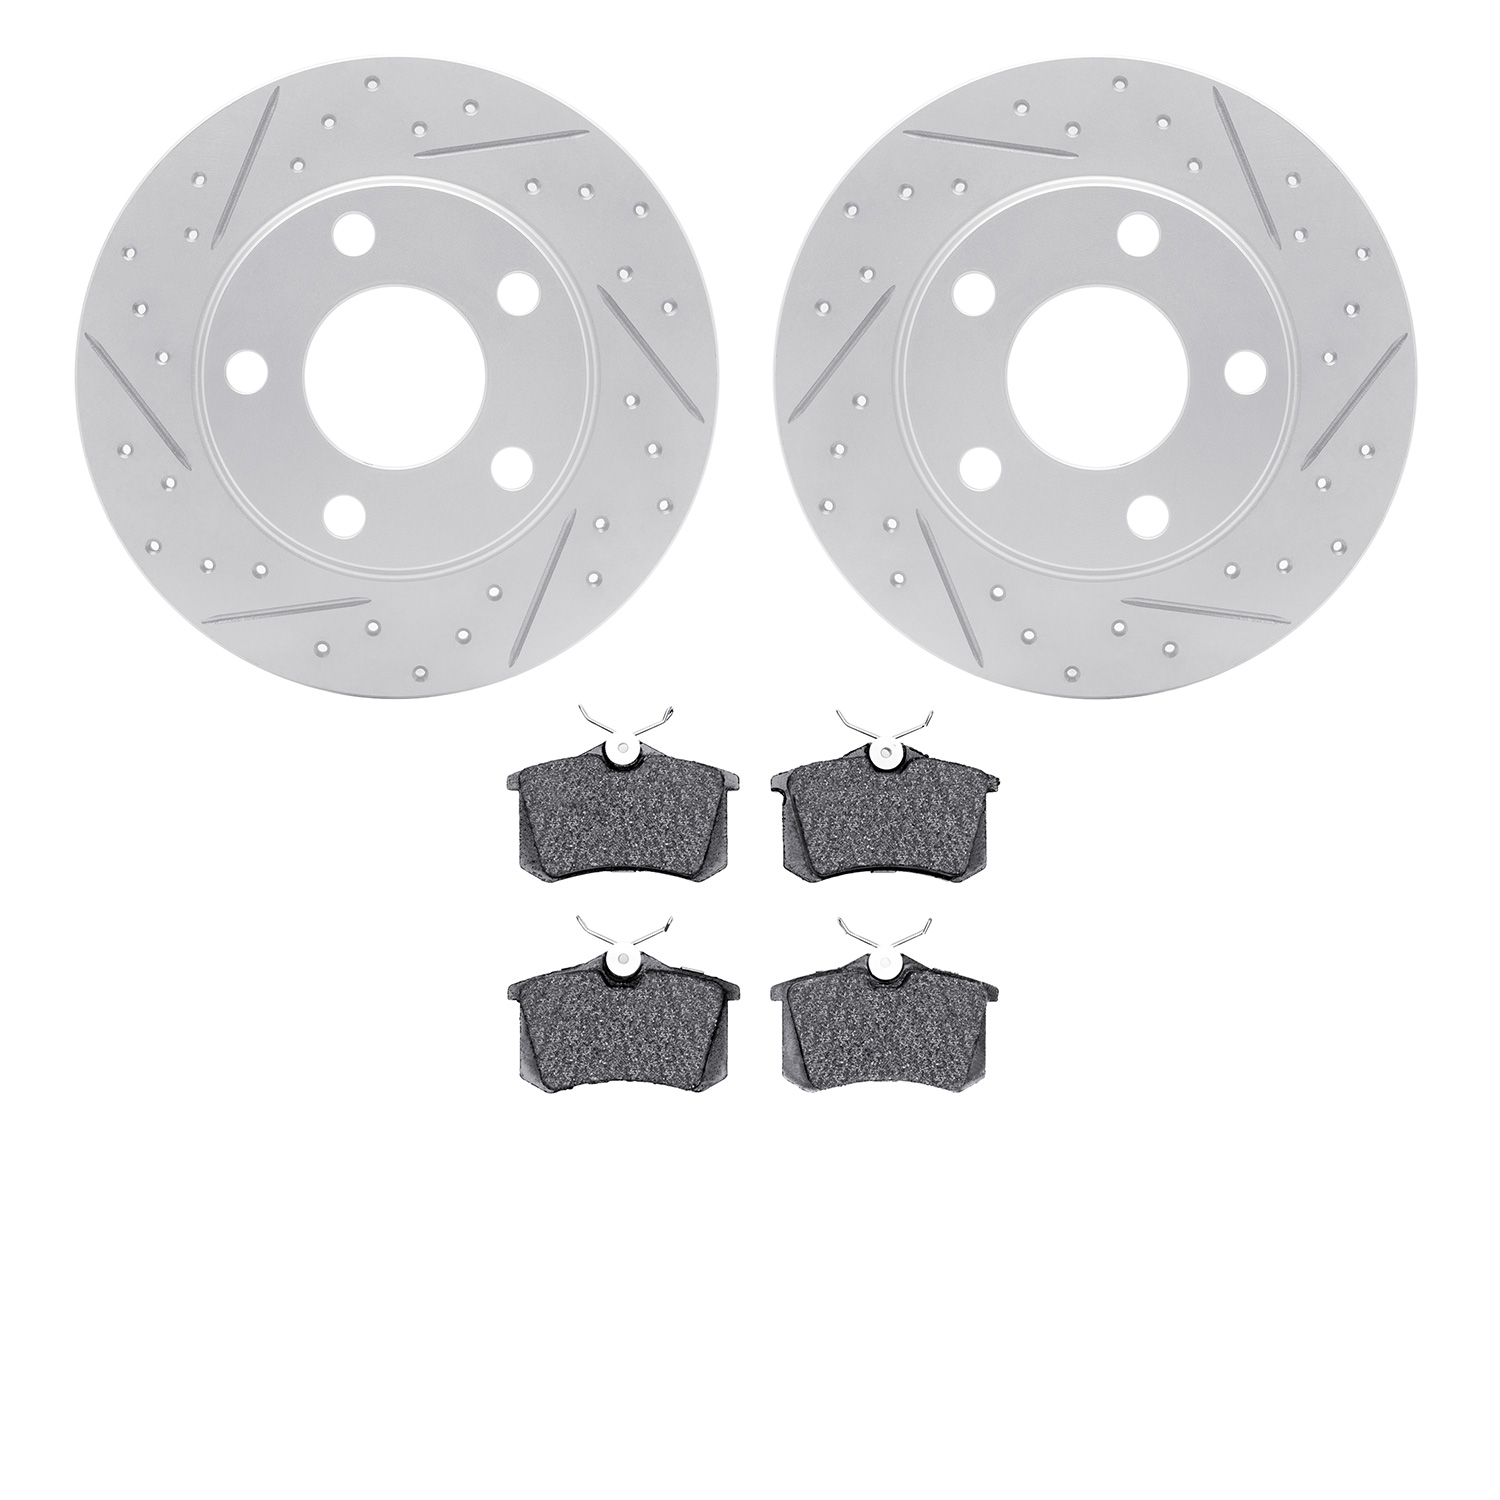 2502-73011 Geoperformance Drilled/Slotted Rotors w/5000 Advanced Brake Pads Kit, 1999-2004 Audi/Volkswagen, Position: Rear